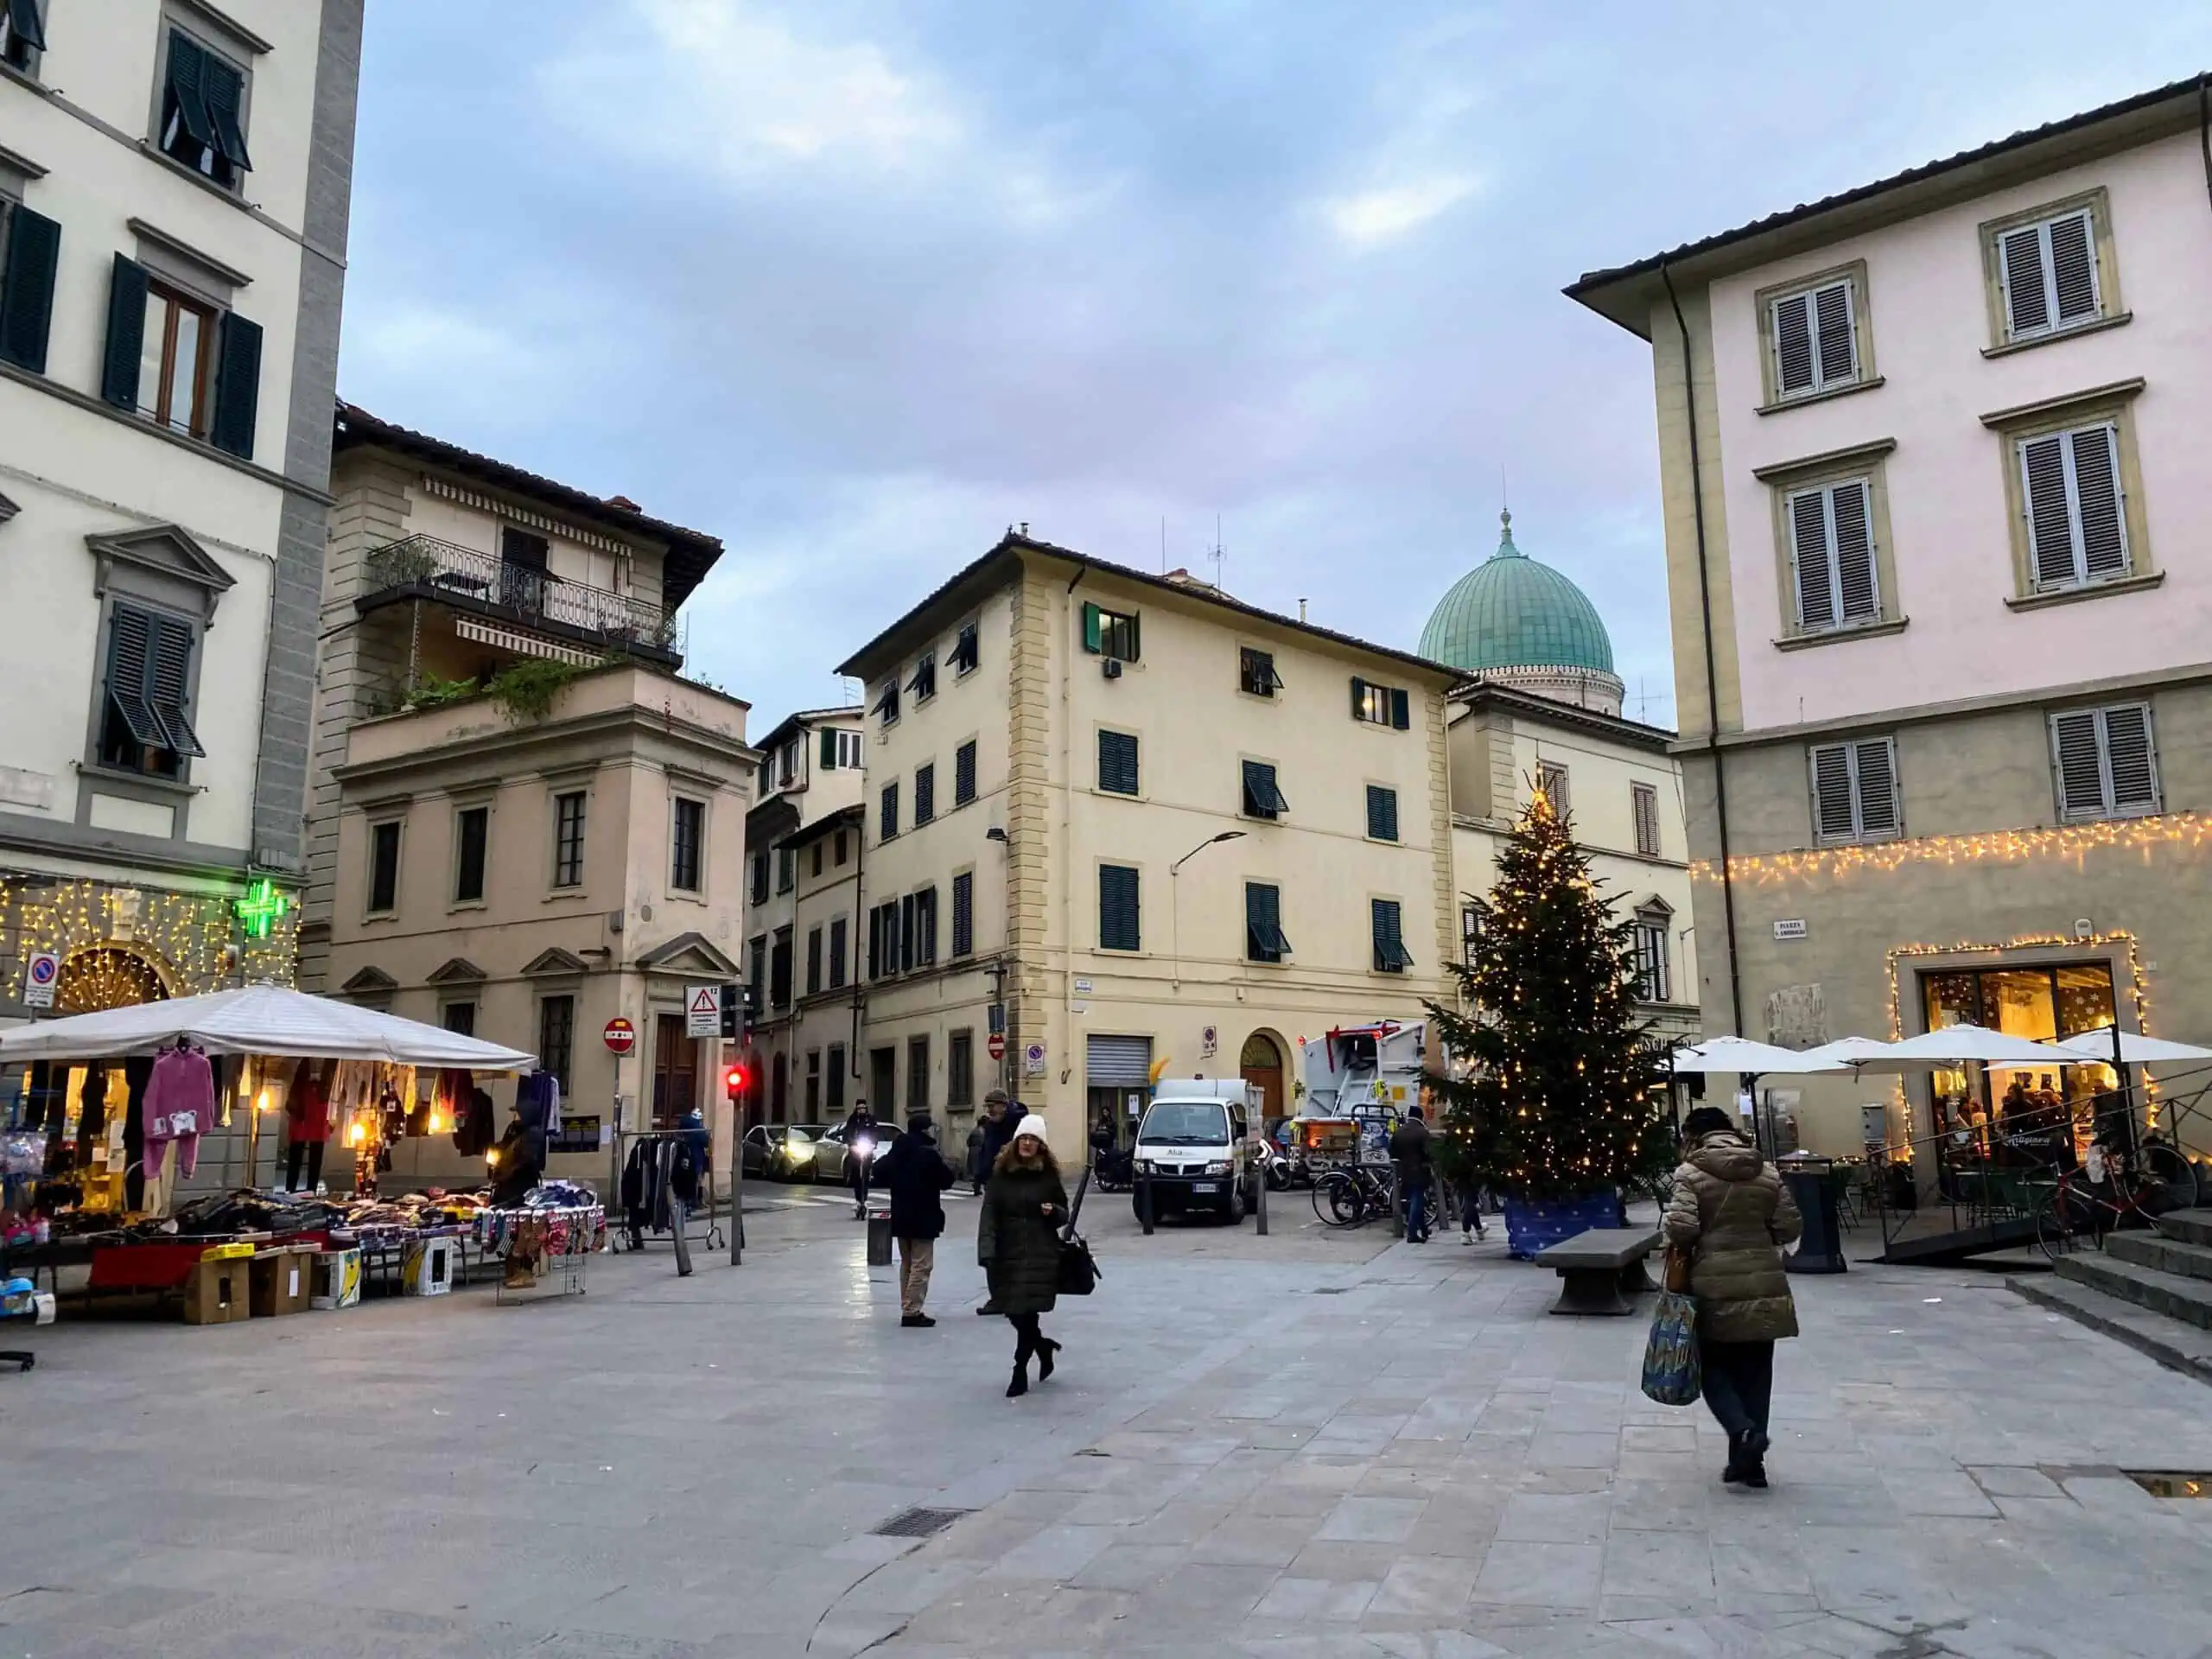 A few people walk in a square in Sant'Ambrogio in Florence, Italy. It's daytime and you can see a Christmas tree in the square and Christmas lights on a couple of the buildings.